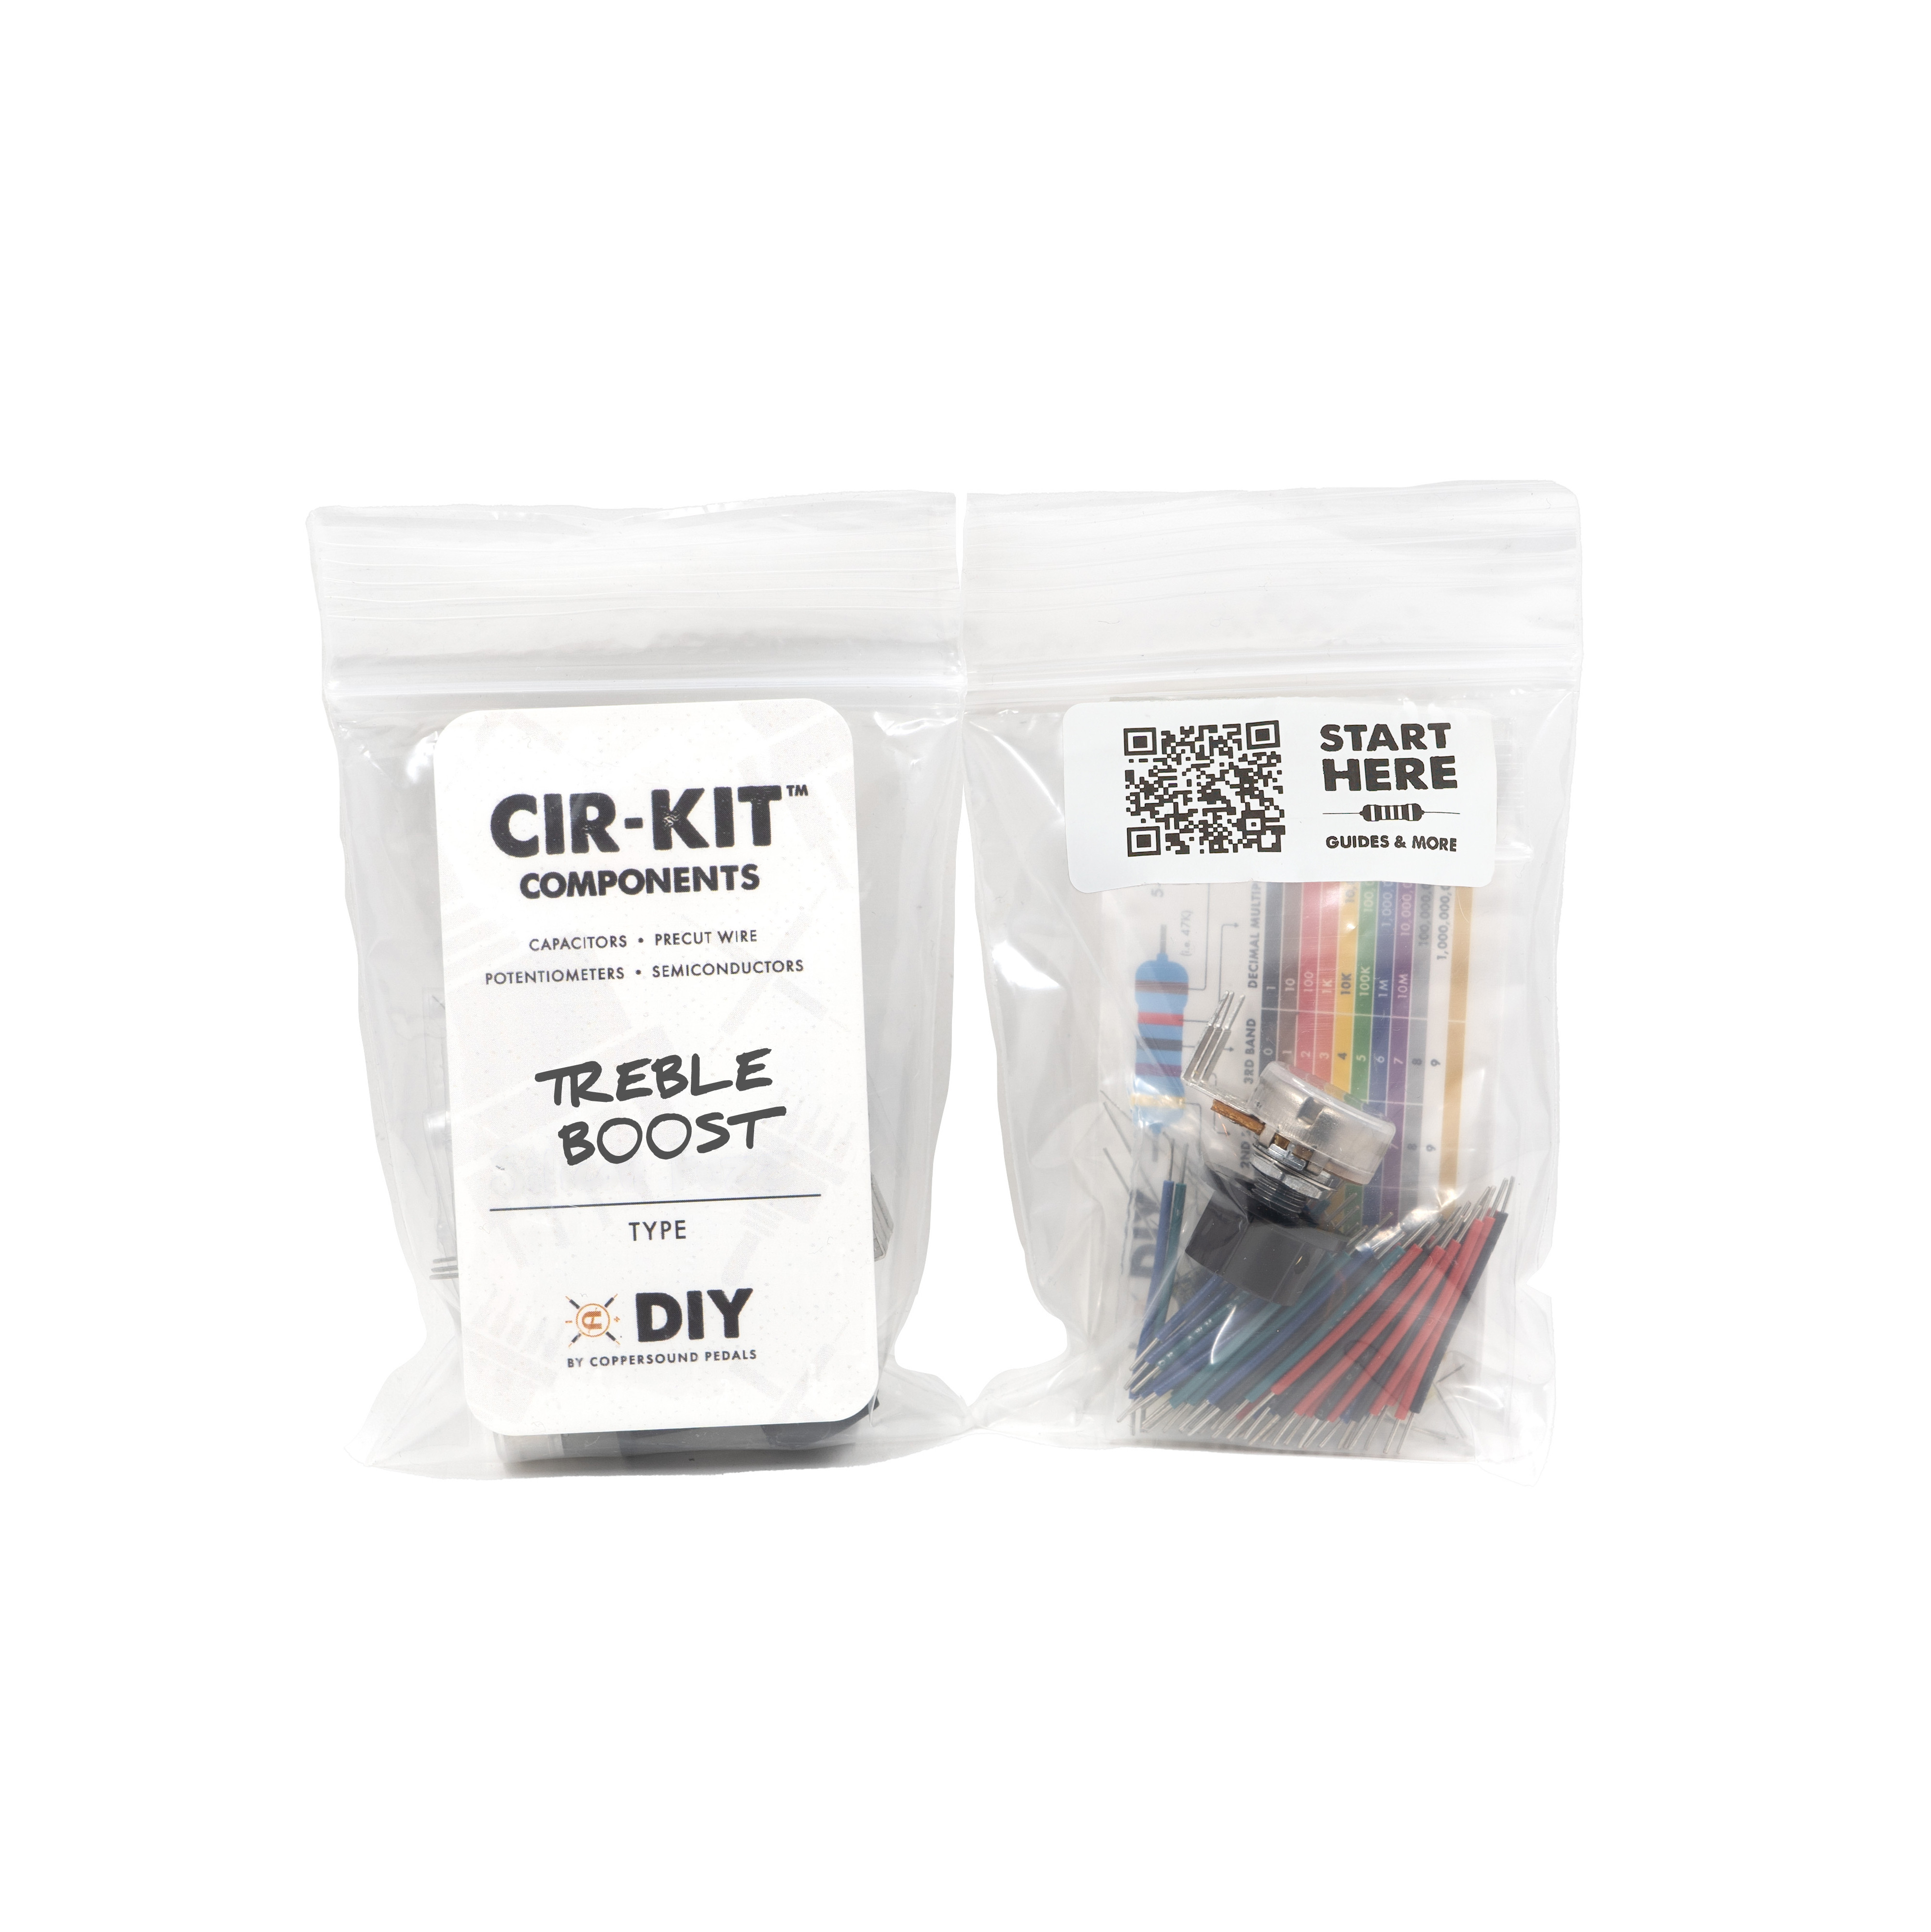 COPPERSOUND Treble Boost Cir-Kit Component Bag